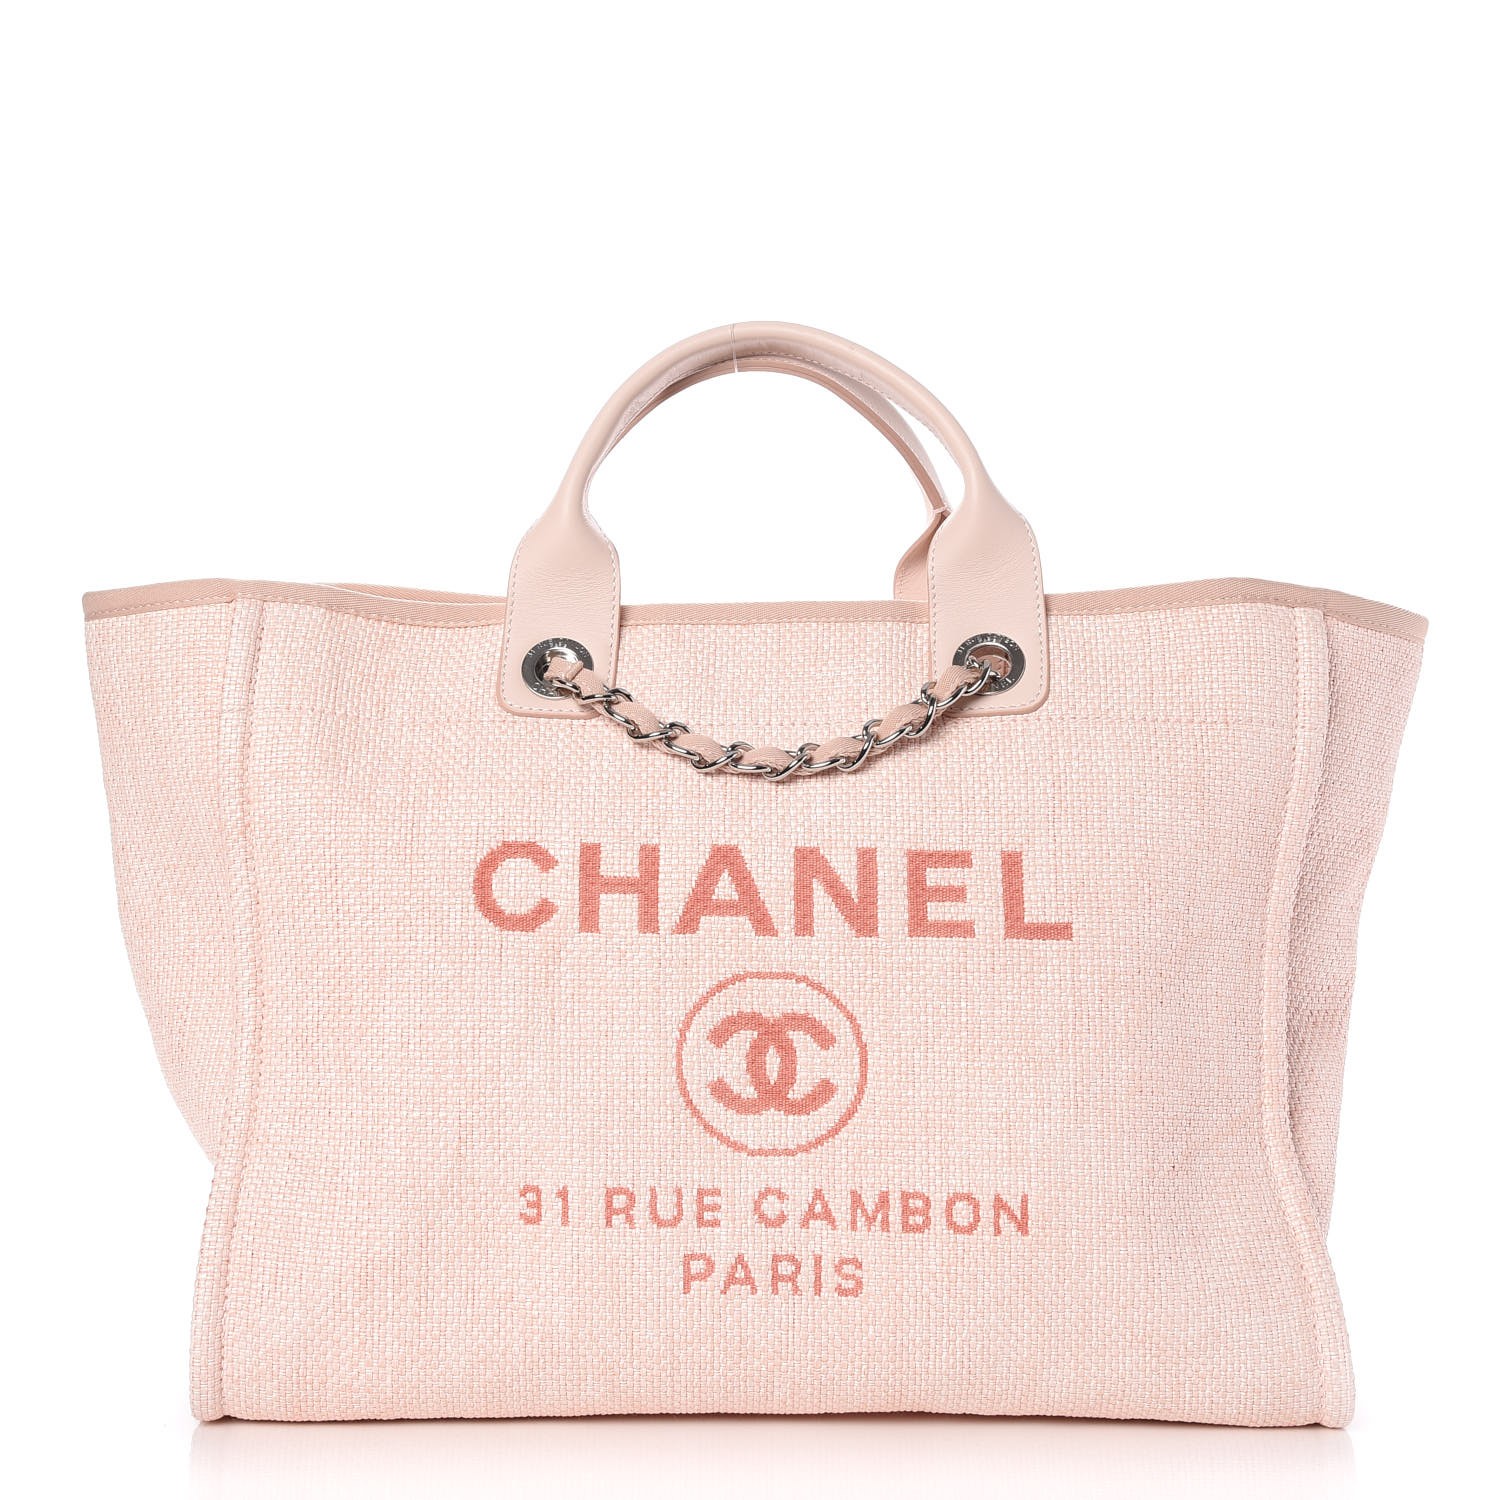 CHANEL Canvas Large Deauville Tote Pink 274248